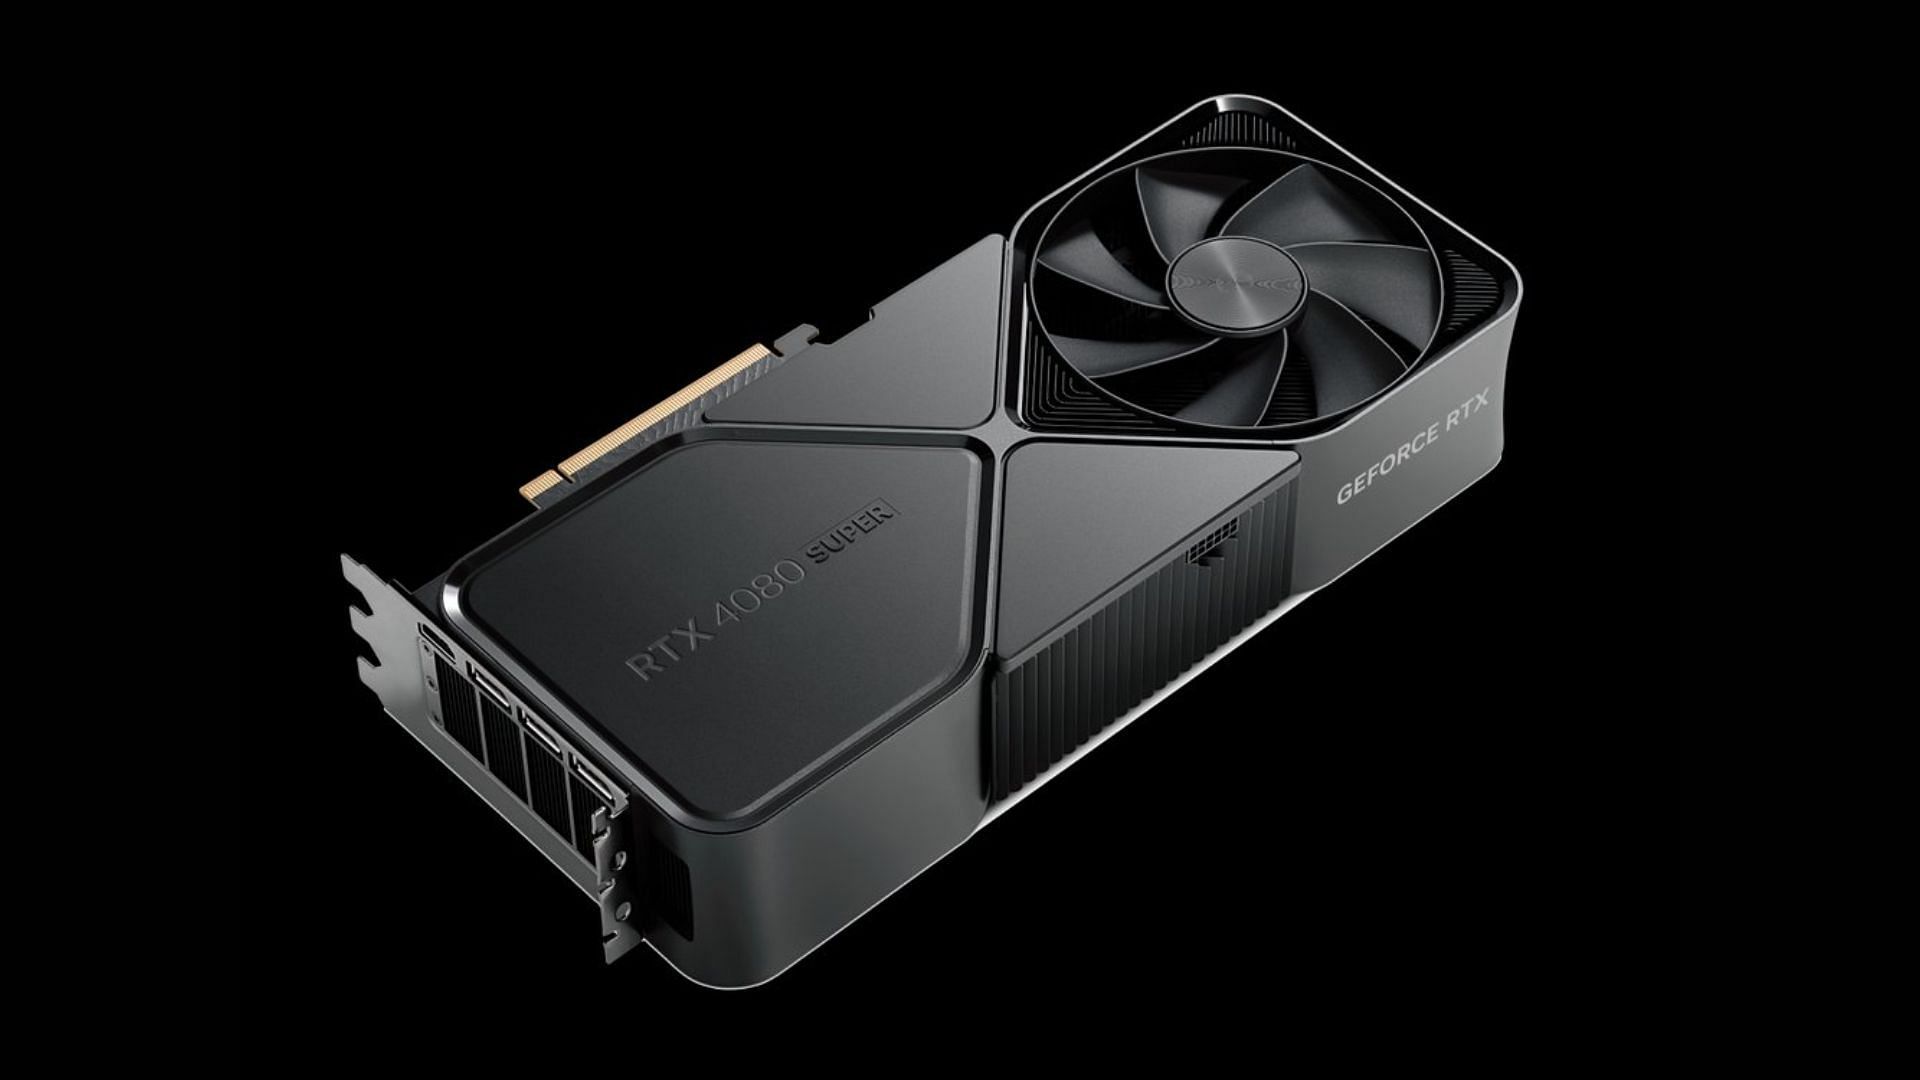 The Nvidia RTX 4080 Super is a capable graphics card for gaming (Image via Nvidia)